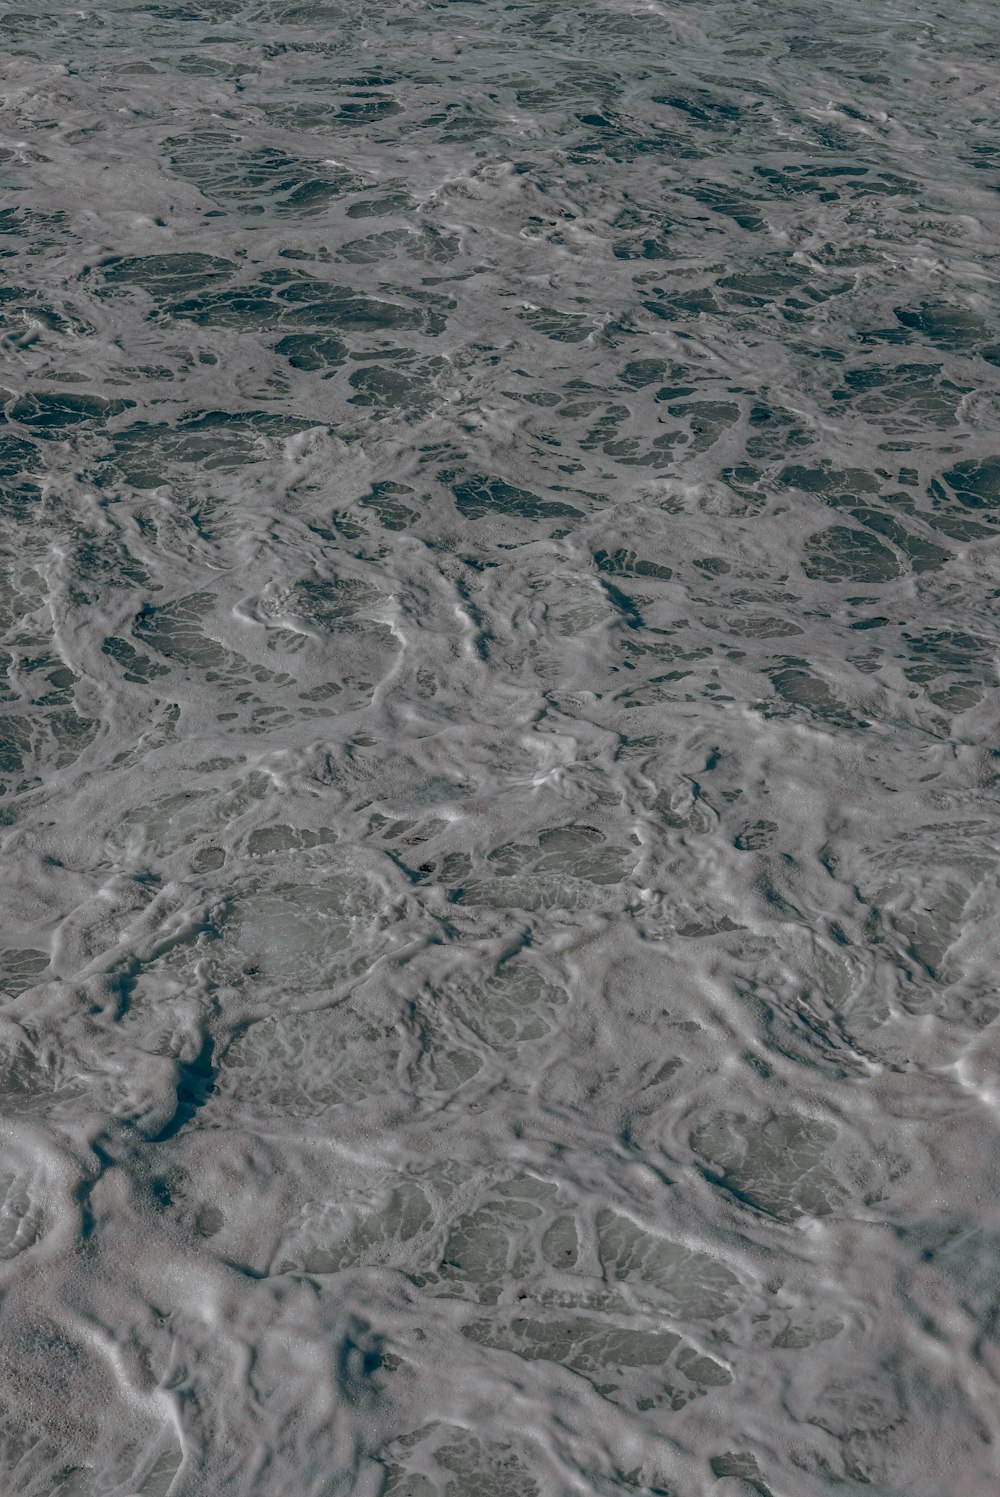 a large body of water with small waves